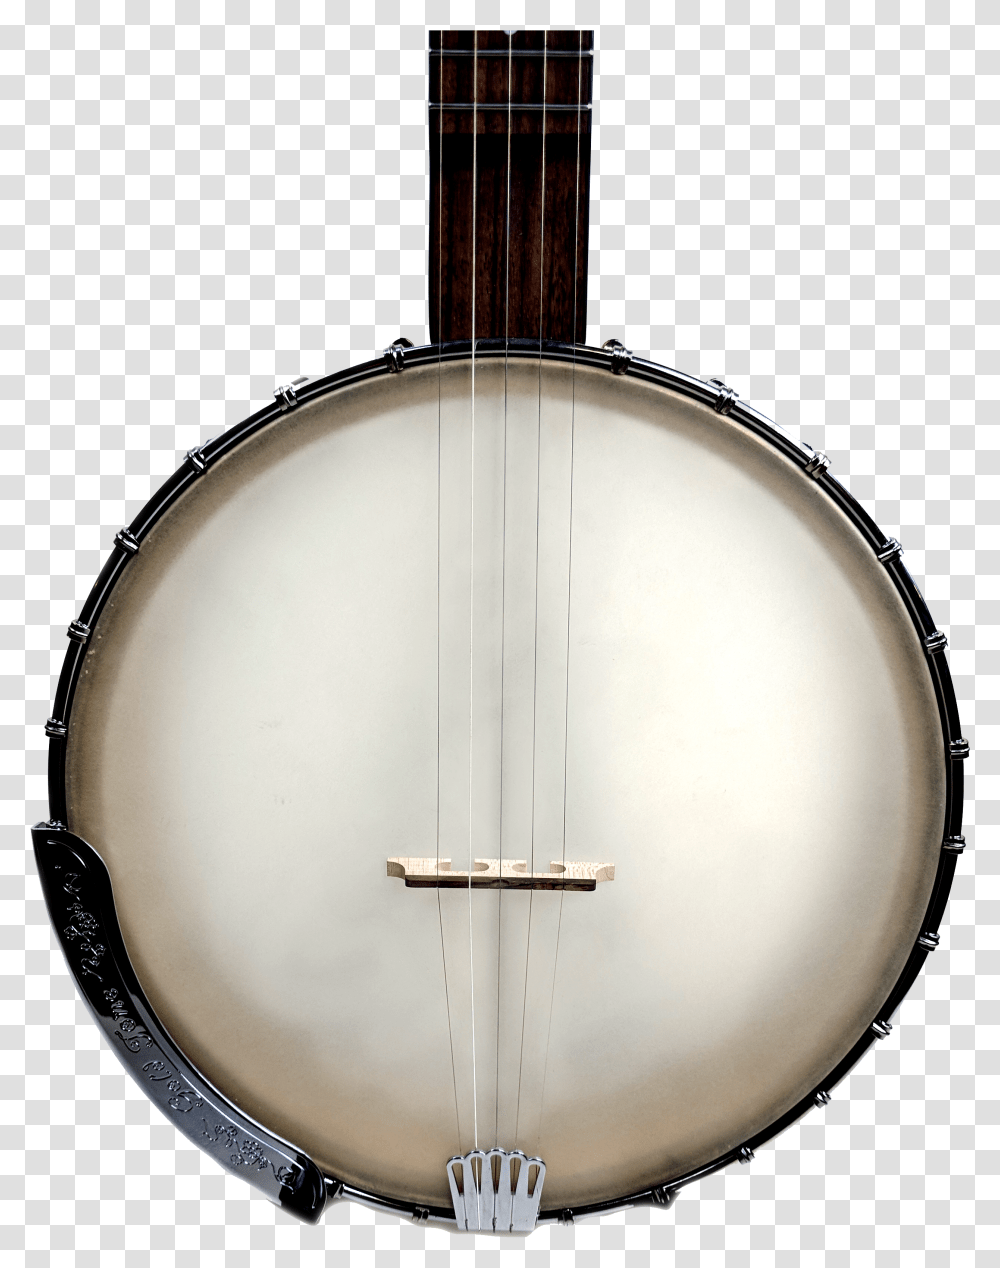 Traditional Japanese Musical Instruments, Lamp, Leisure Activities, Banjo Transparent Png